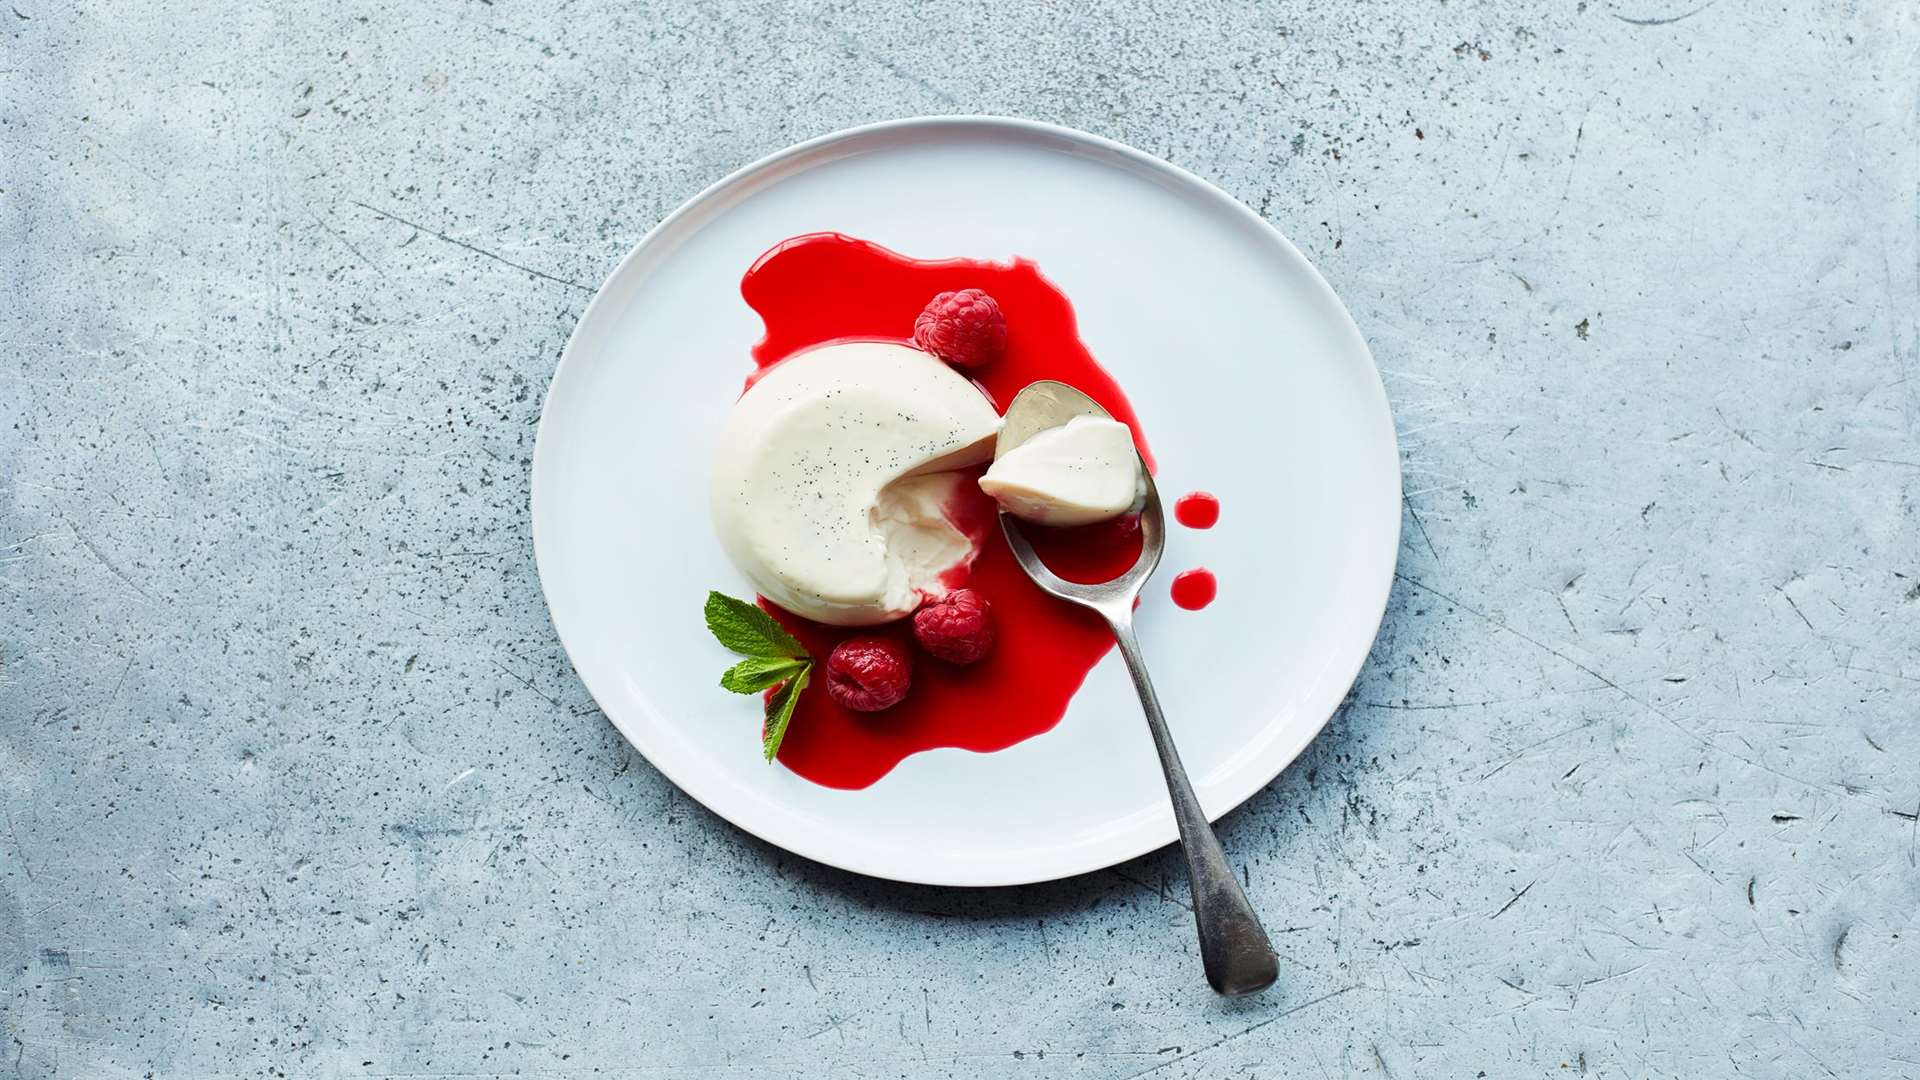 You could treat Mum to Panna Cotta at Carluccio's